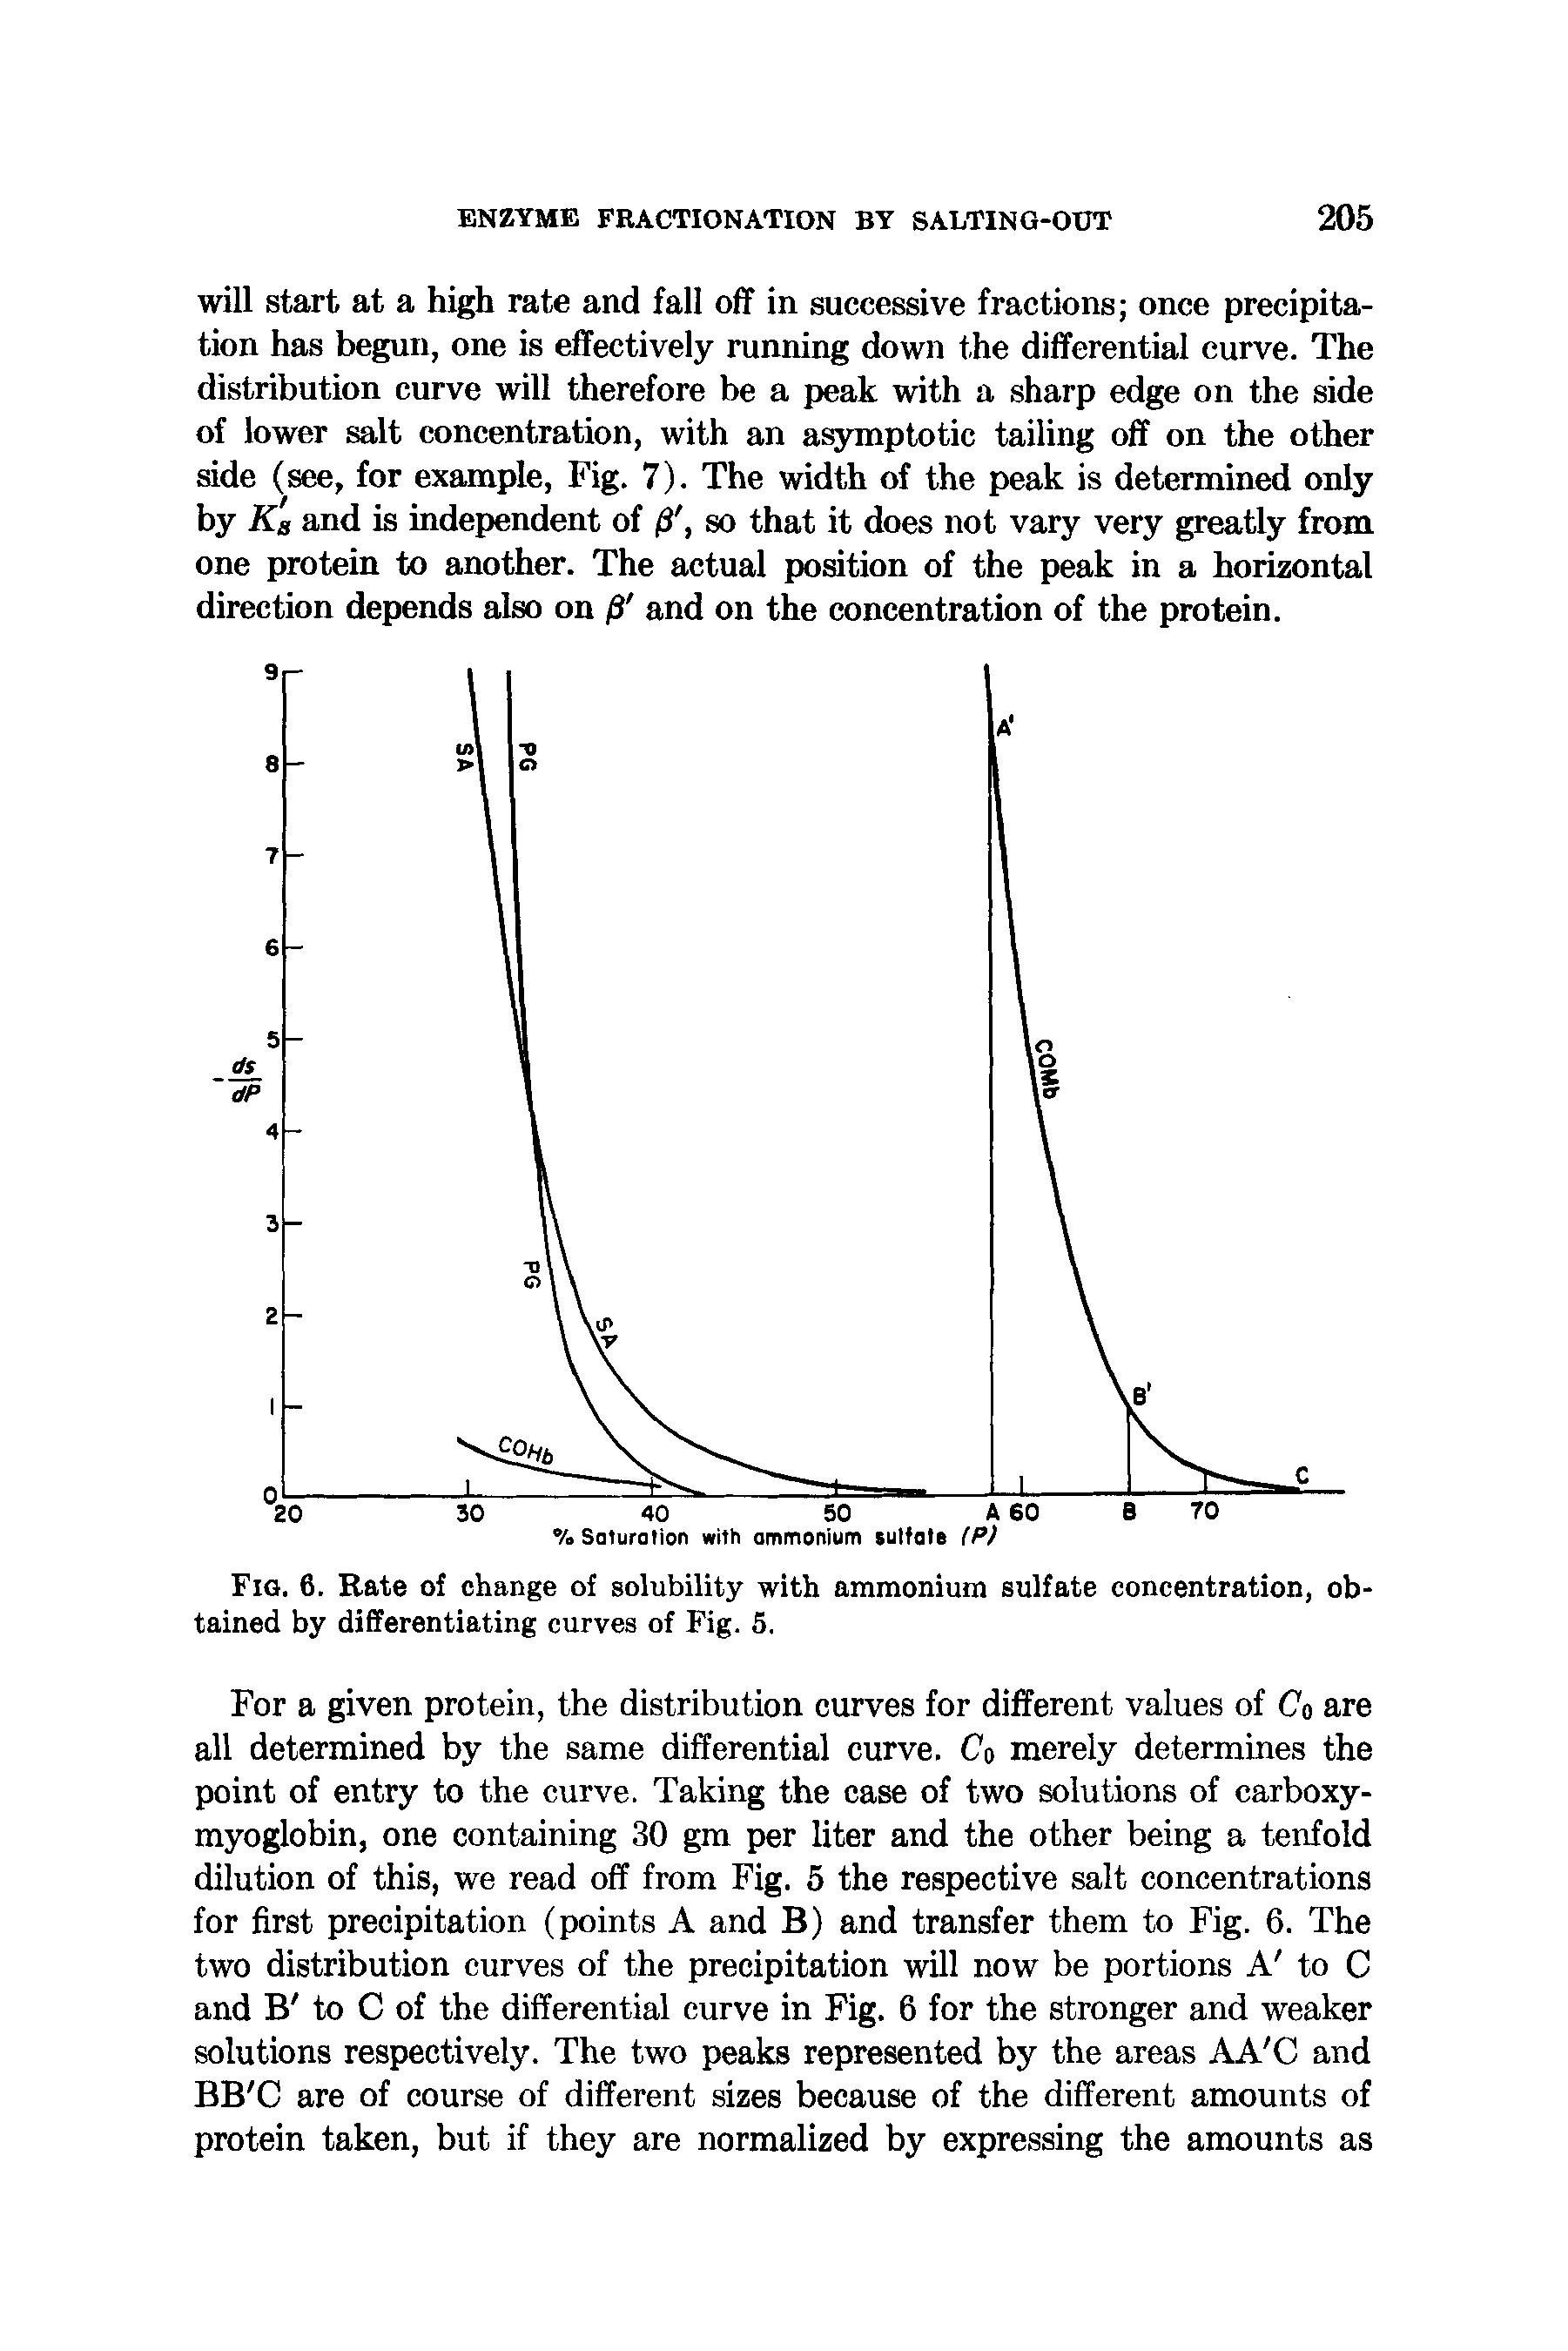 Fig. 6. Rate of change of solubility with ammonium sulfate concentration, obtained by differentiating curves of Fig. 5.